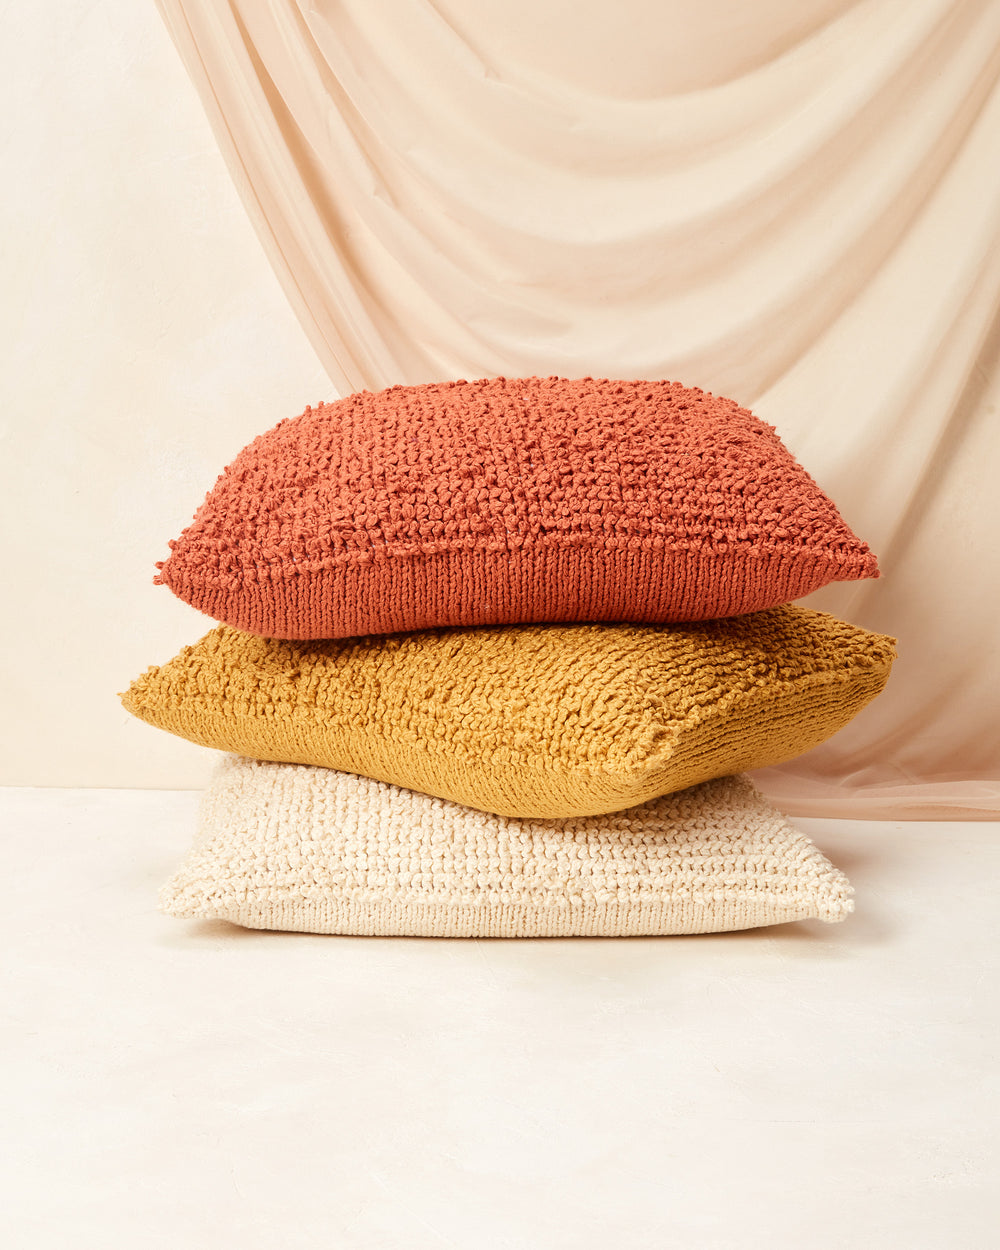 Ethically made, hand knit MINNA Cloud Pillow in 100% GOTS-certified organic cotton in a cream, off-white, persimmon, coral, goldenrod, deep yellow.  Decorative Throw Pillow